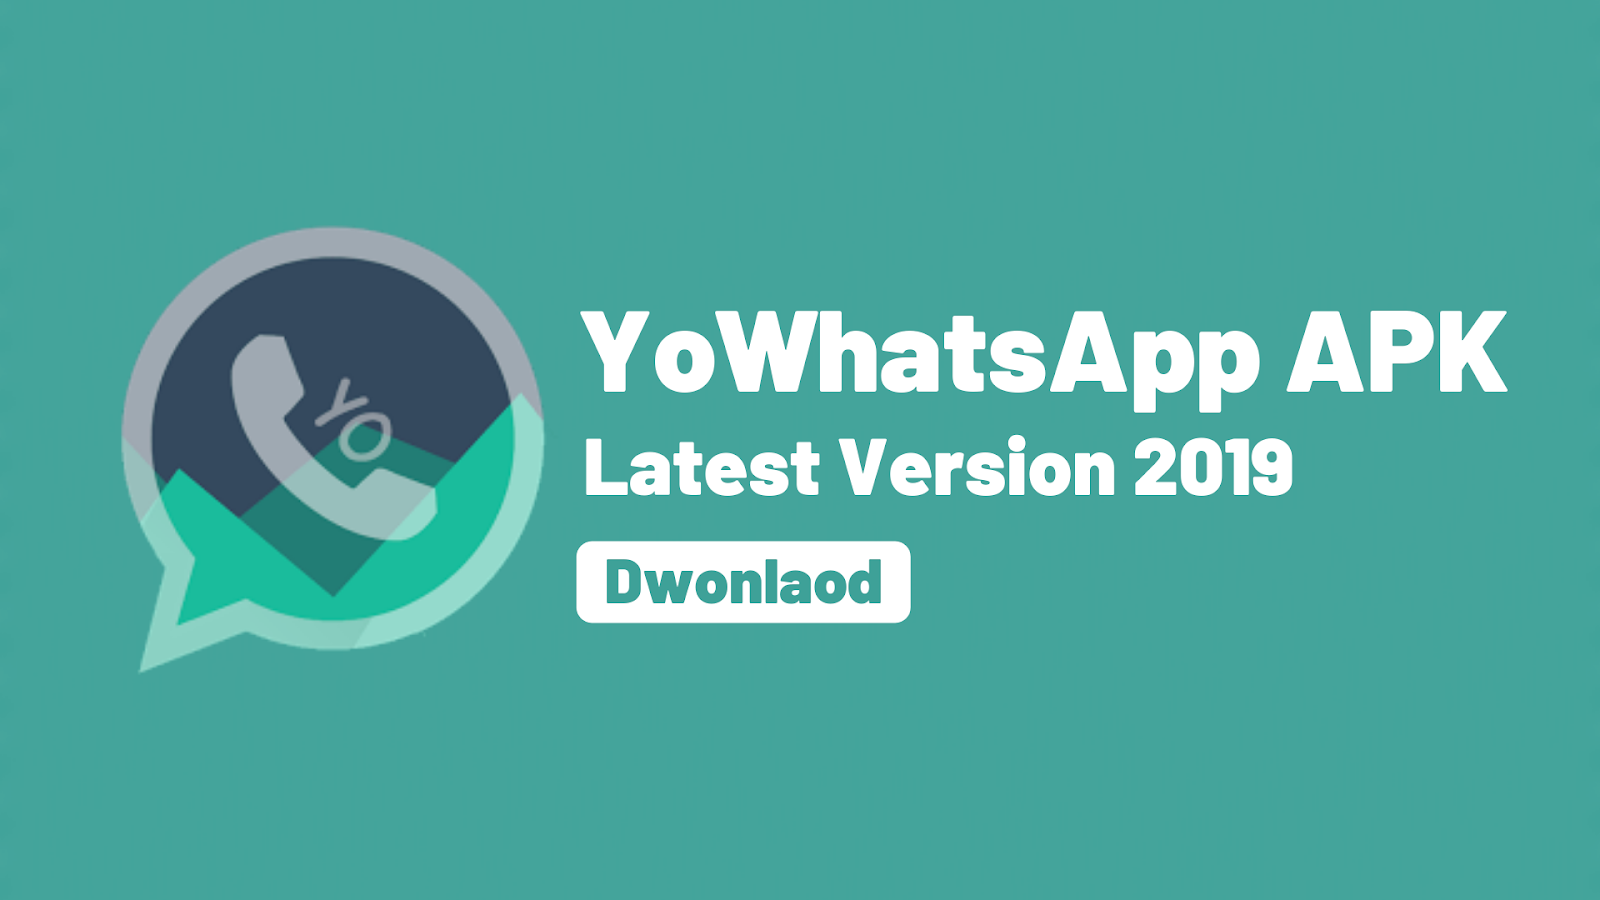 whatsapp apk download for android latest version